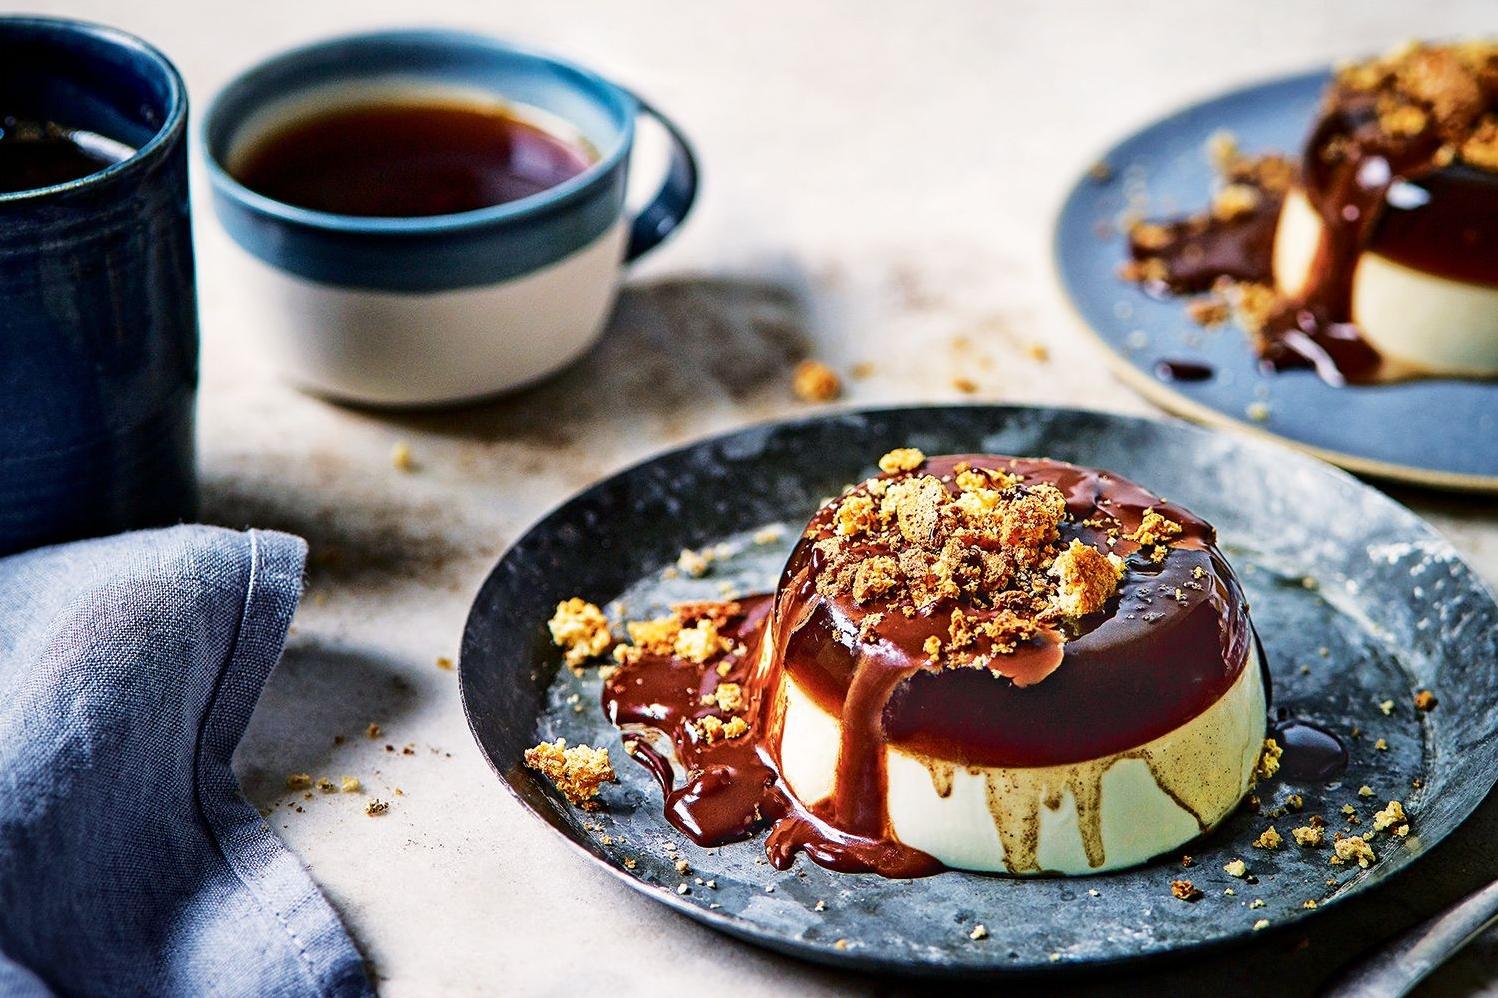  A classic Italian dessert with a twist of coffee, it's hard to resist this heavenly dessert.